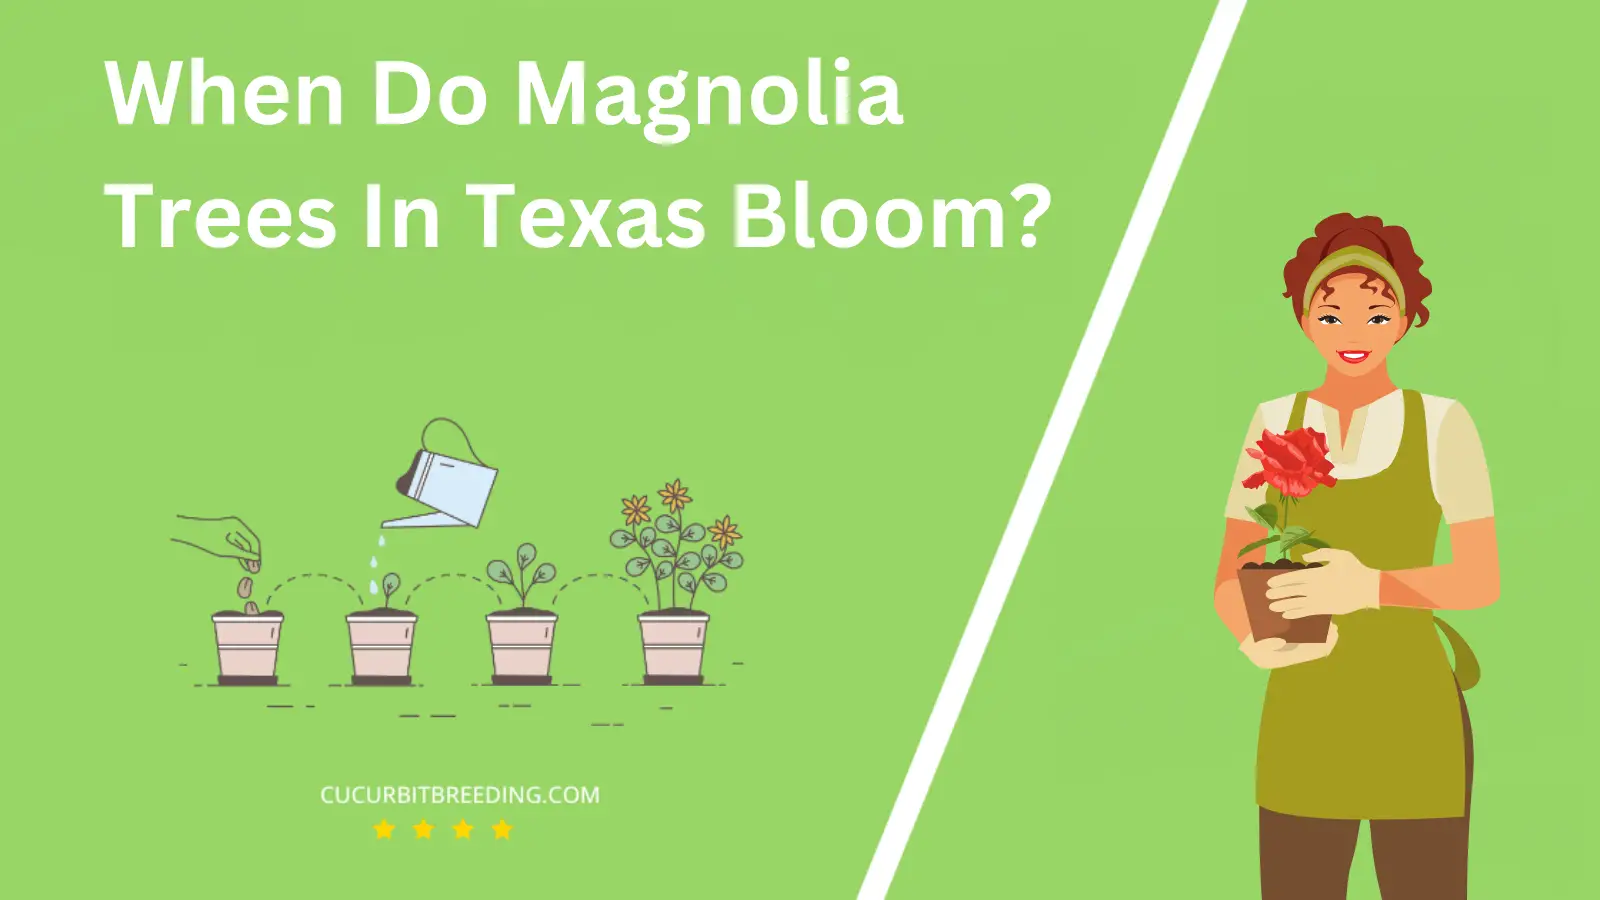 When Do Magnolia Trees In Texas Bloom?